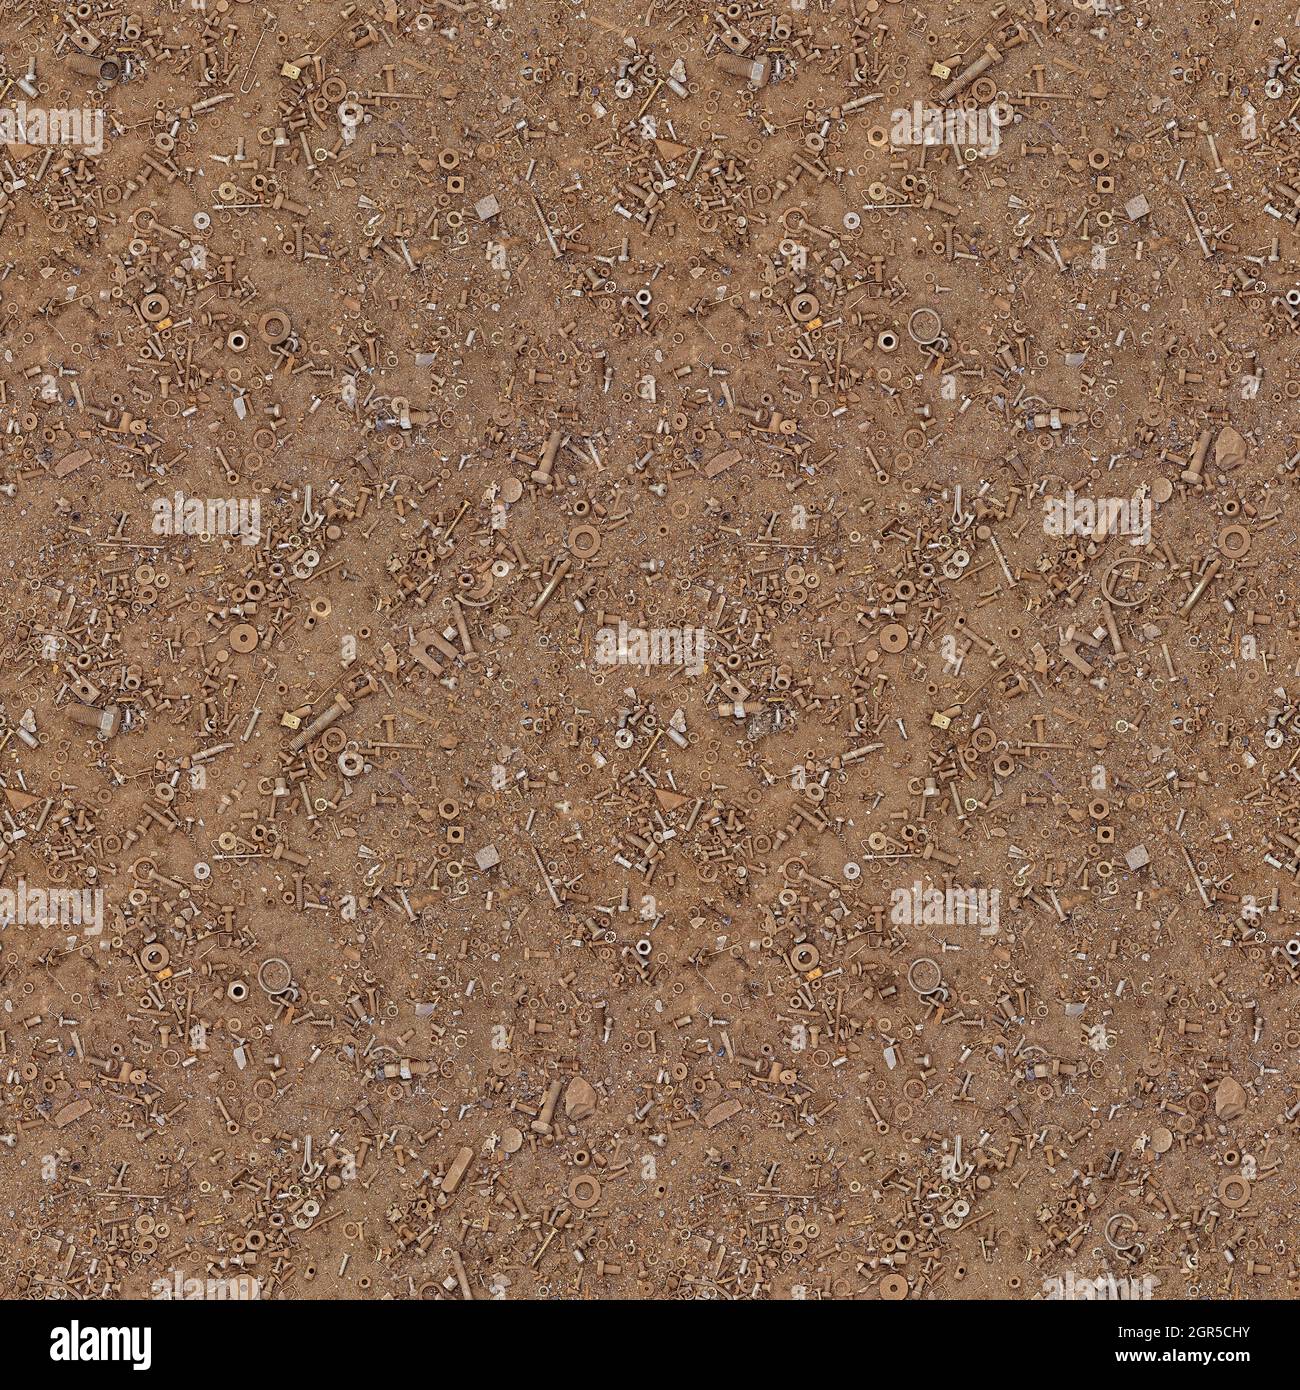 Rusty Nuts and Bolts Seamless Background Texture Stock Photo